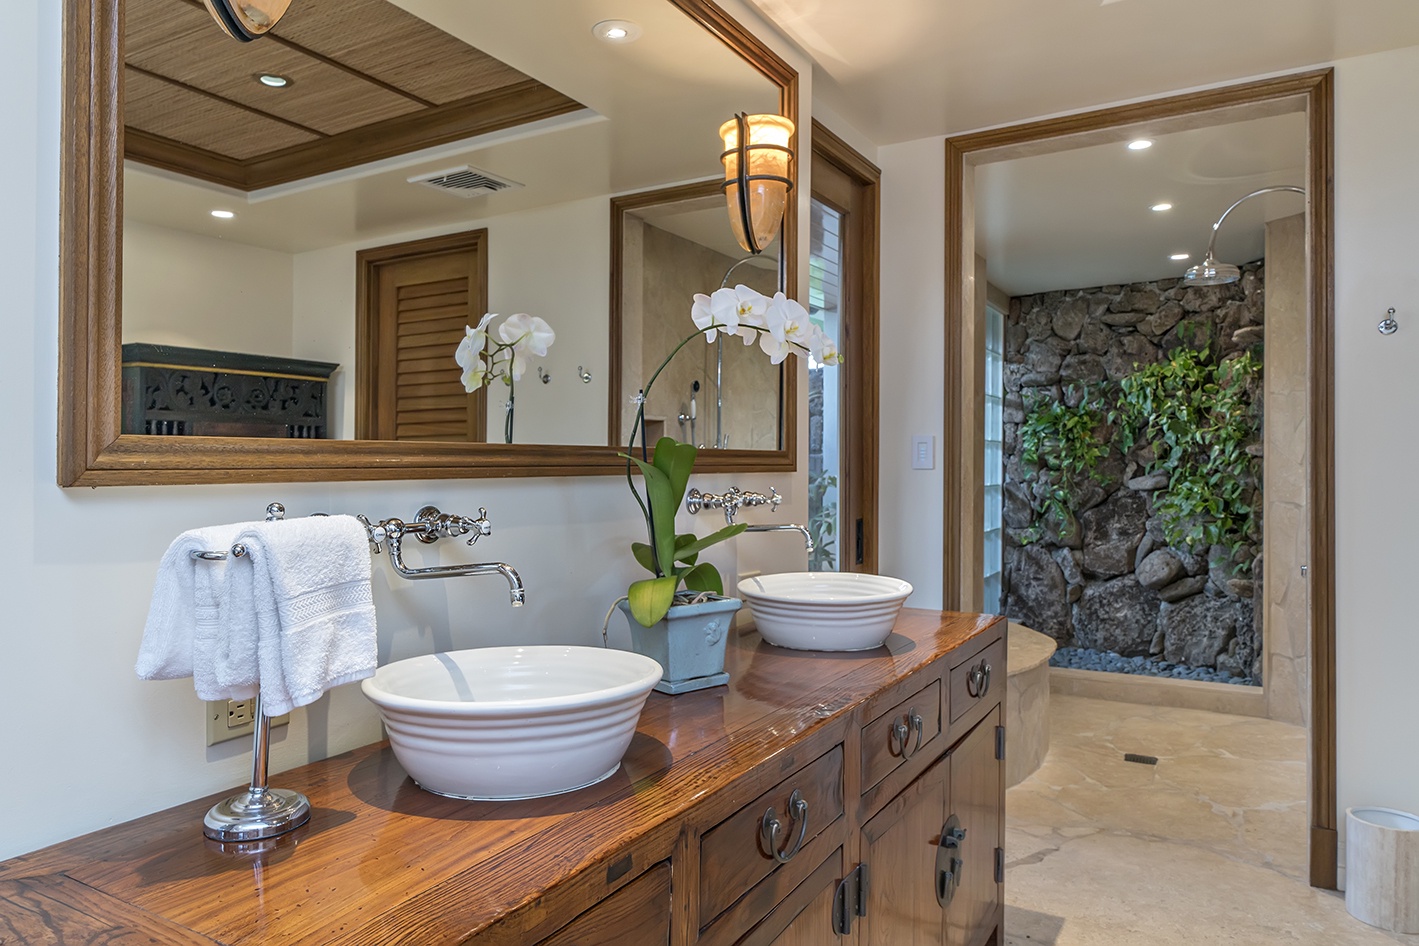 Kailua Vacation Rentals, Kailua's Kai Moena Estate - Guest house: Primary Bathroom with walk in shower.